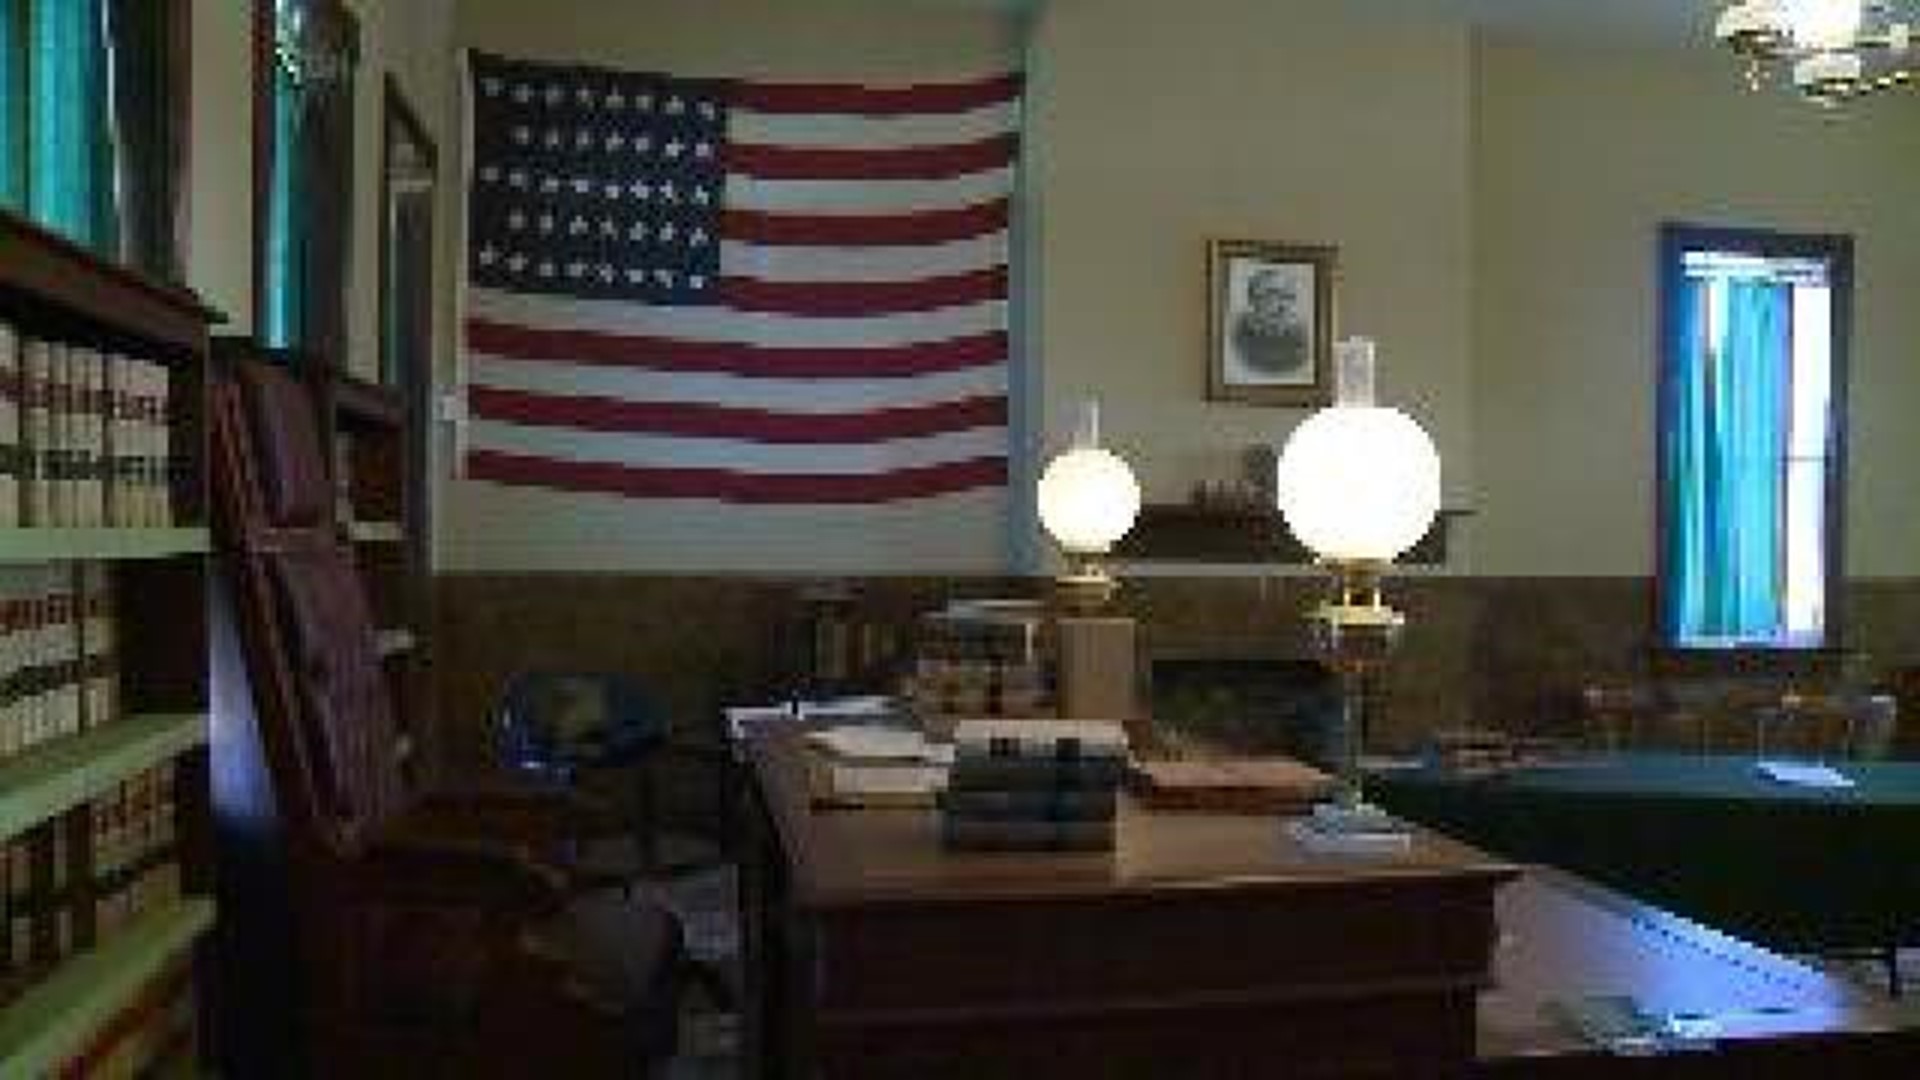 A Look at the Fort Smith Historical Society